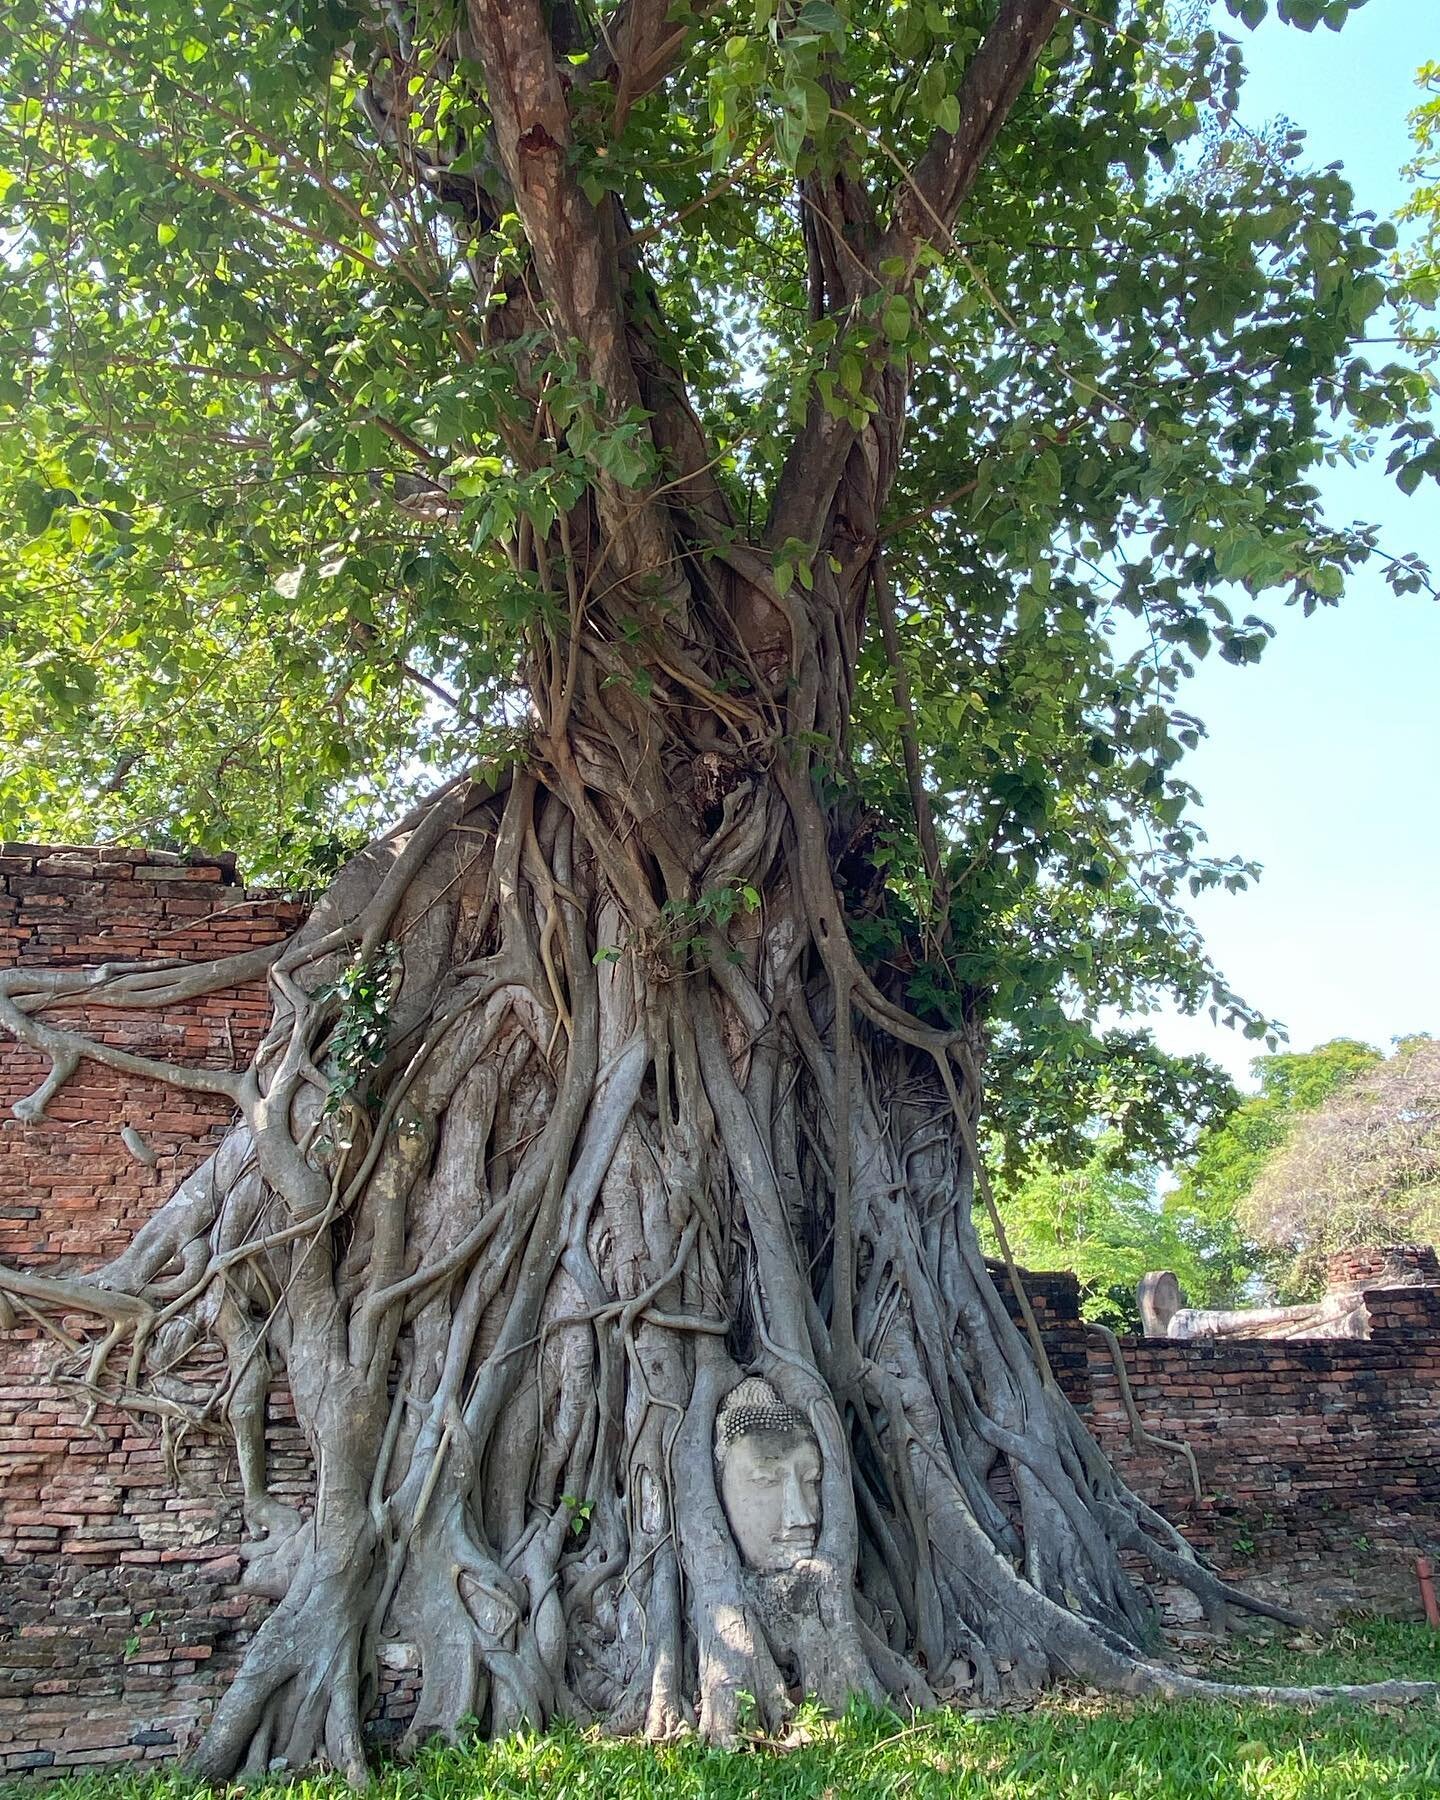 from my time in ayutthaya, thailand. a cool break in the lush shade during a 40 degree sweat fest of a day. 

we practice mindfulness to cultivate wisdom. wisdom is the cooling force in a world/heart on fire. 

#sati #mindfulness #insight #vipassana 